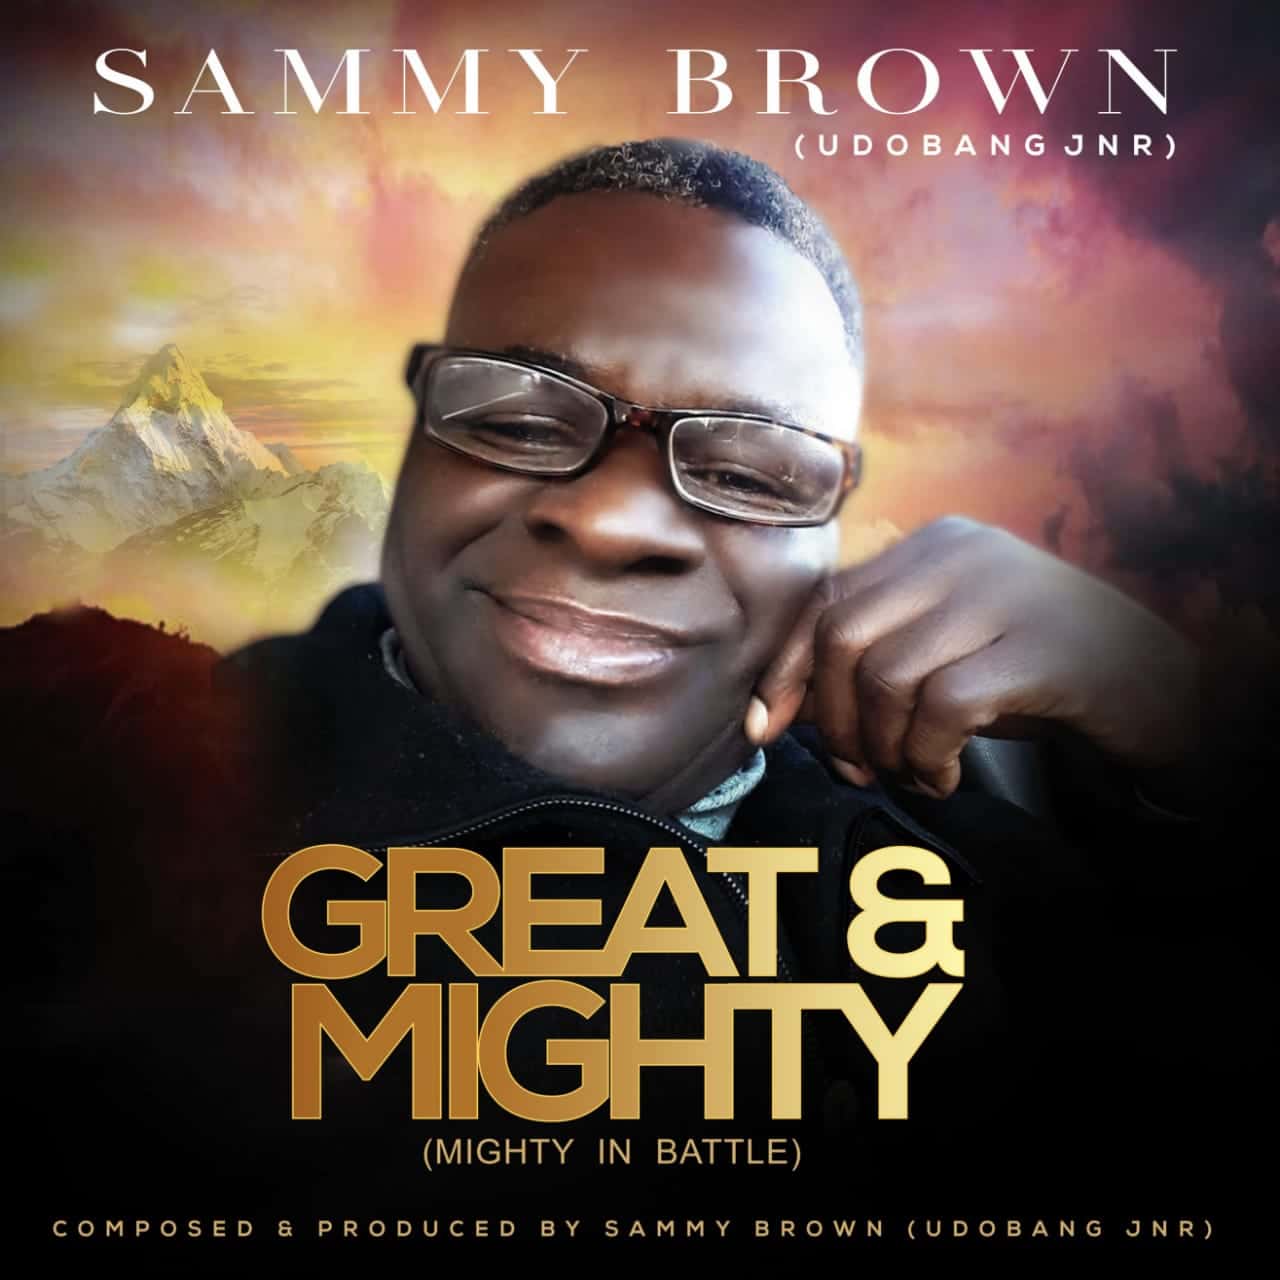 Download Mp3: Sammy Brown Udobang Jnr - Great & Mighty (Mighty In Battle)